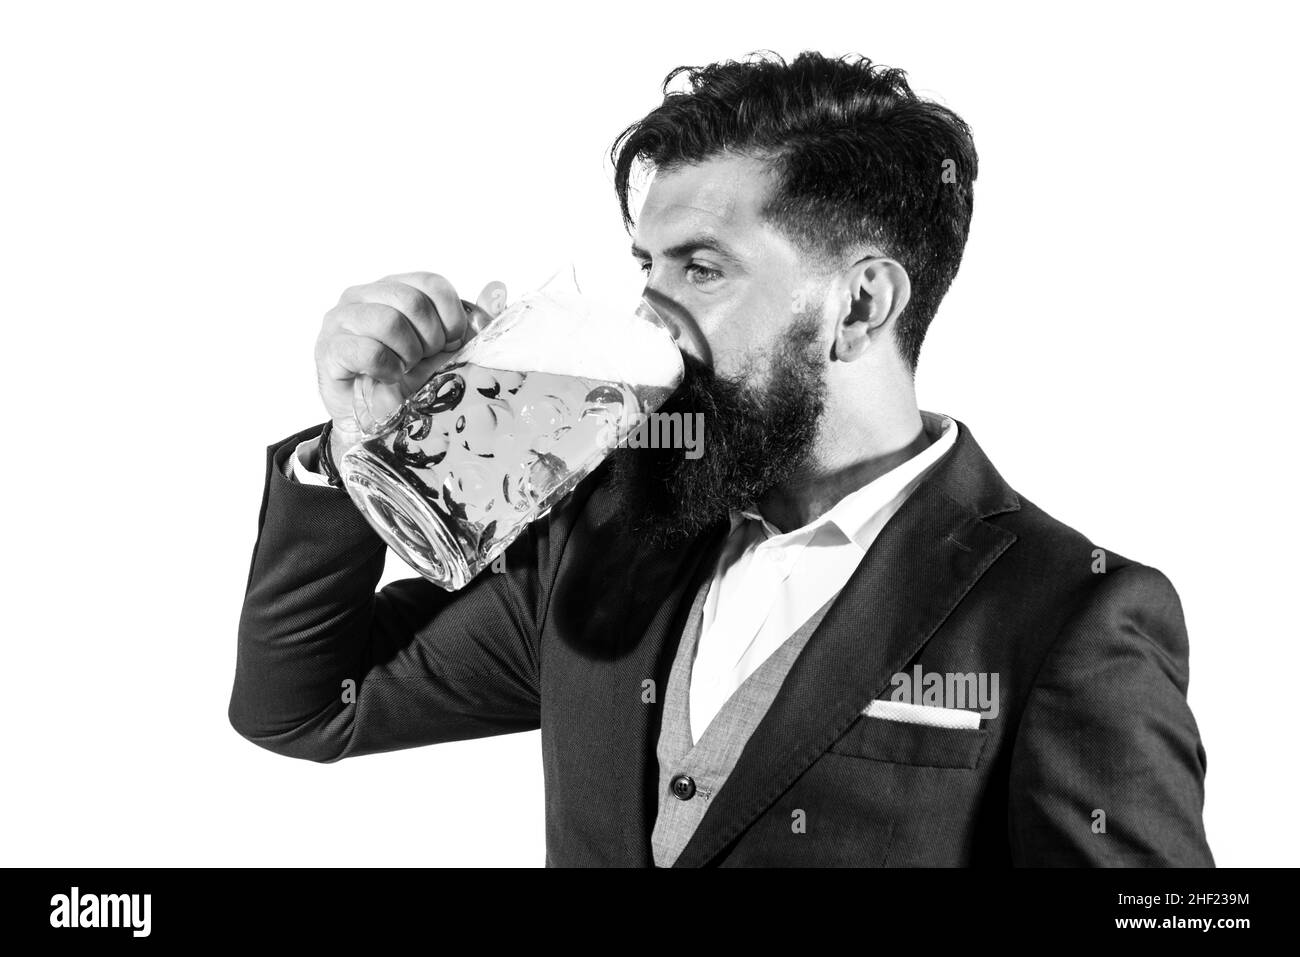 Retro man with a beer, alcoholic beverages. Guy drinking beer. Stock Photo